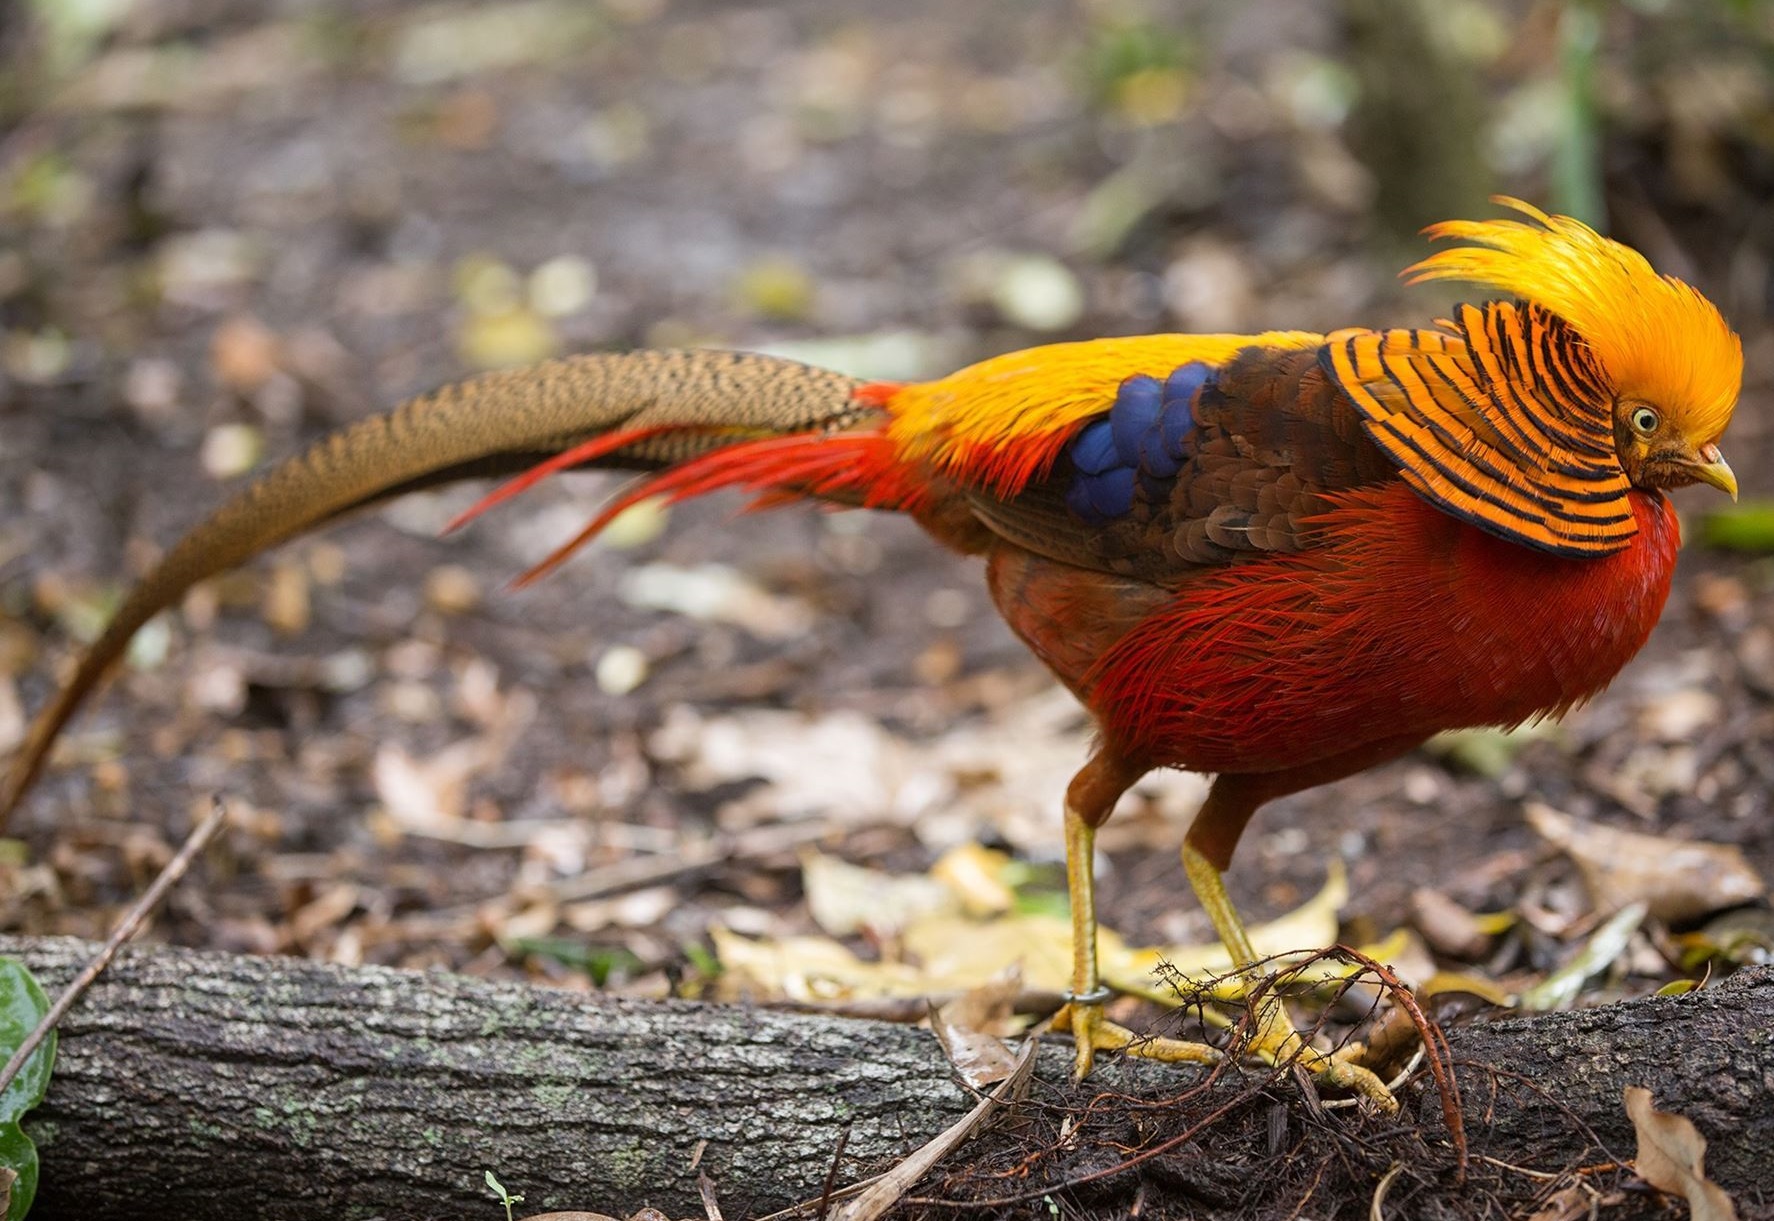 Golden Pheasant Top 20 Most Beautiful Colorful Birds in The World - 15